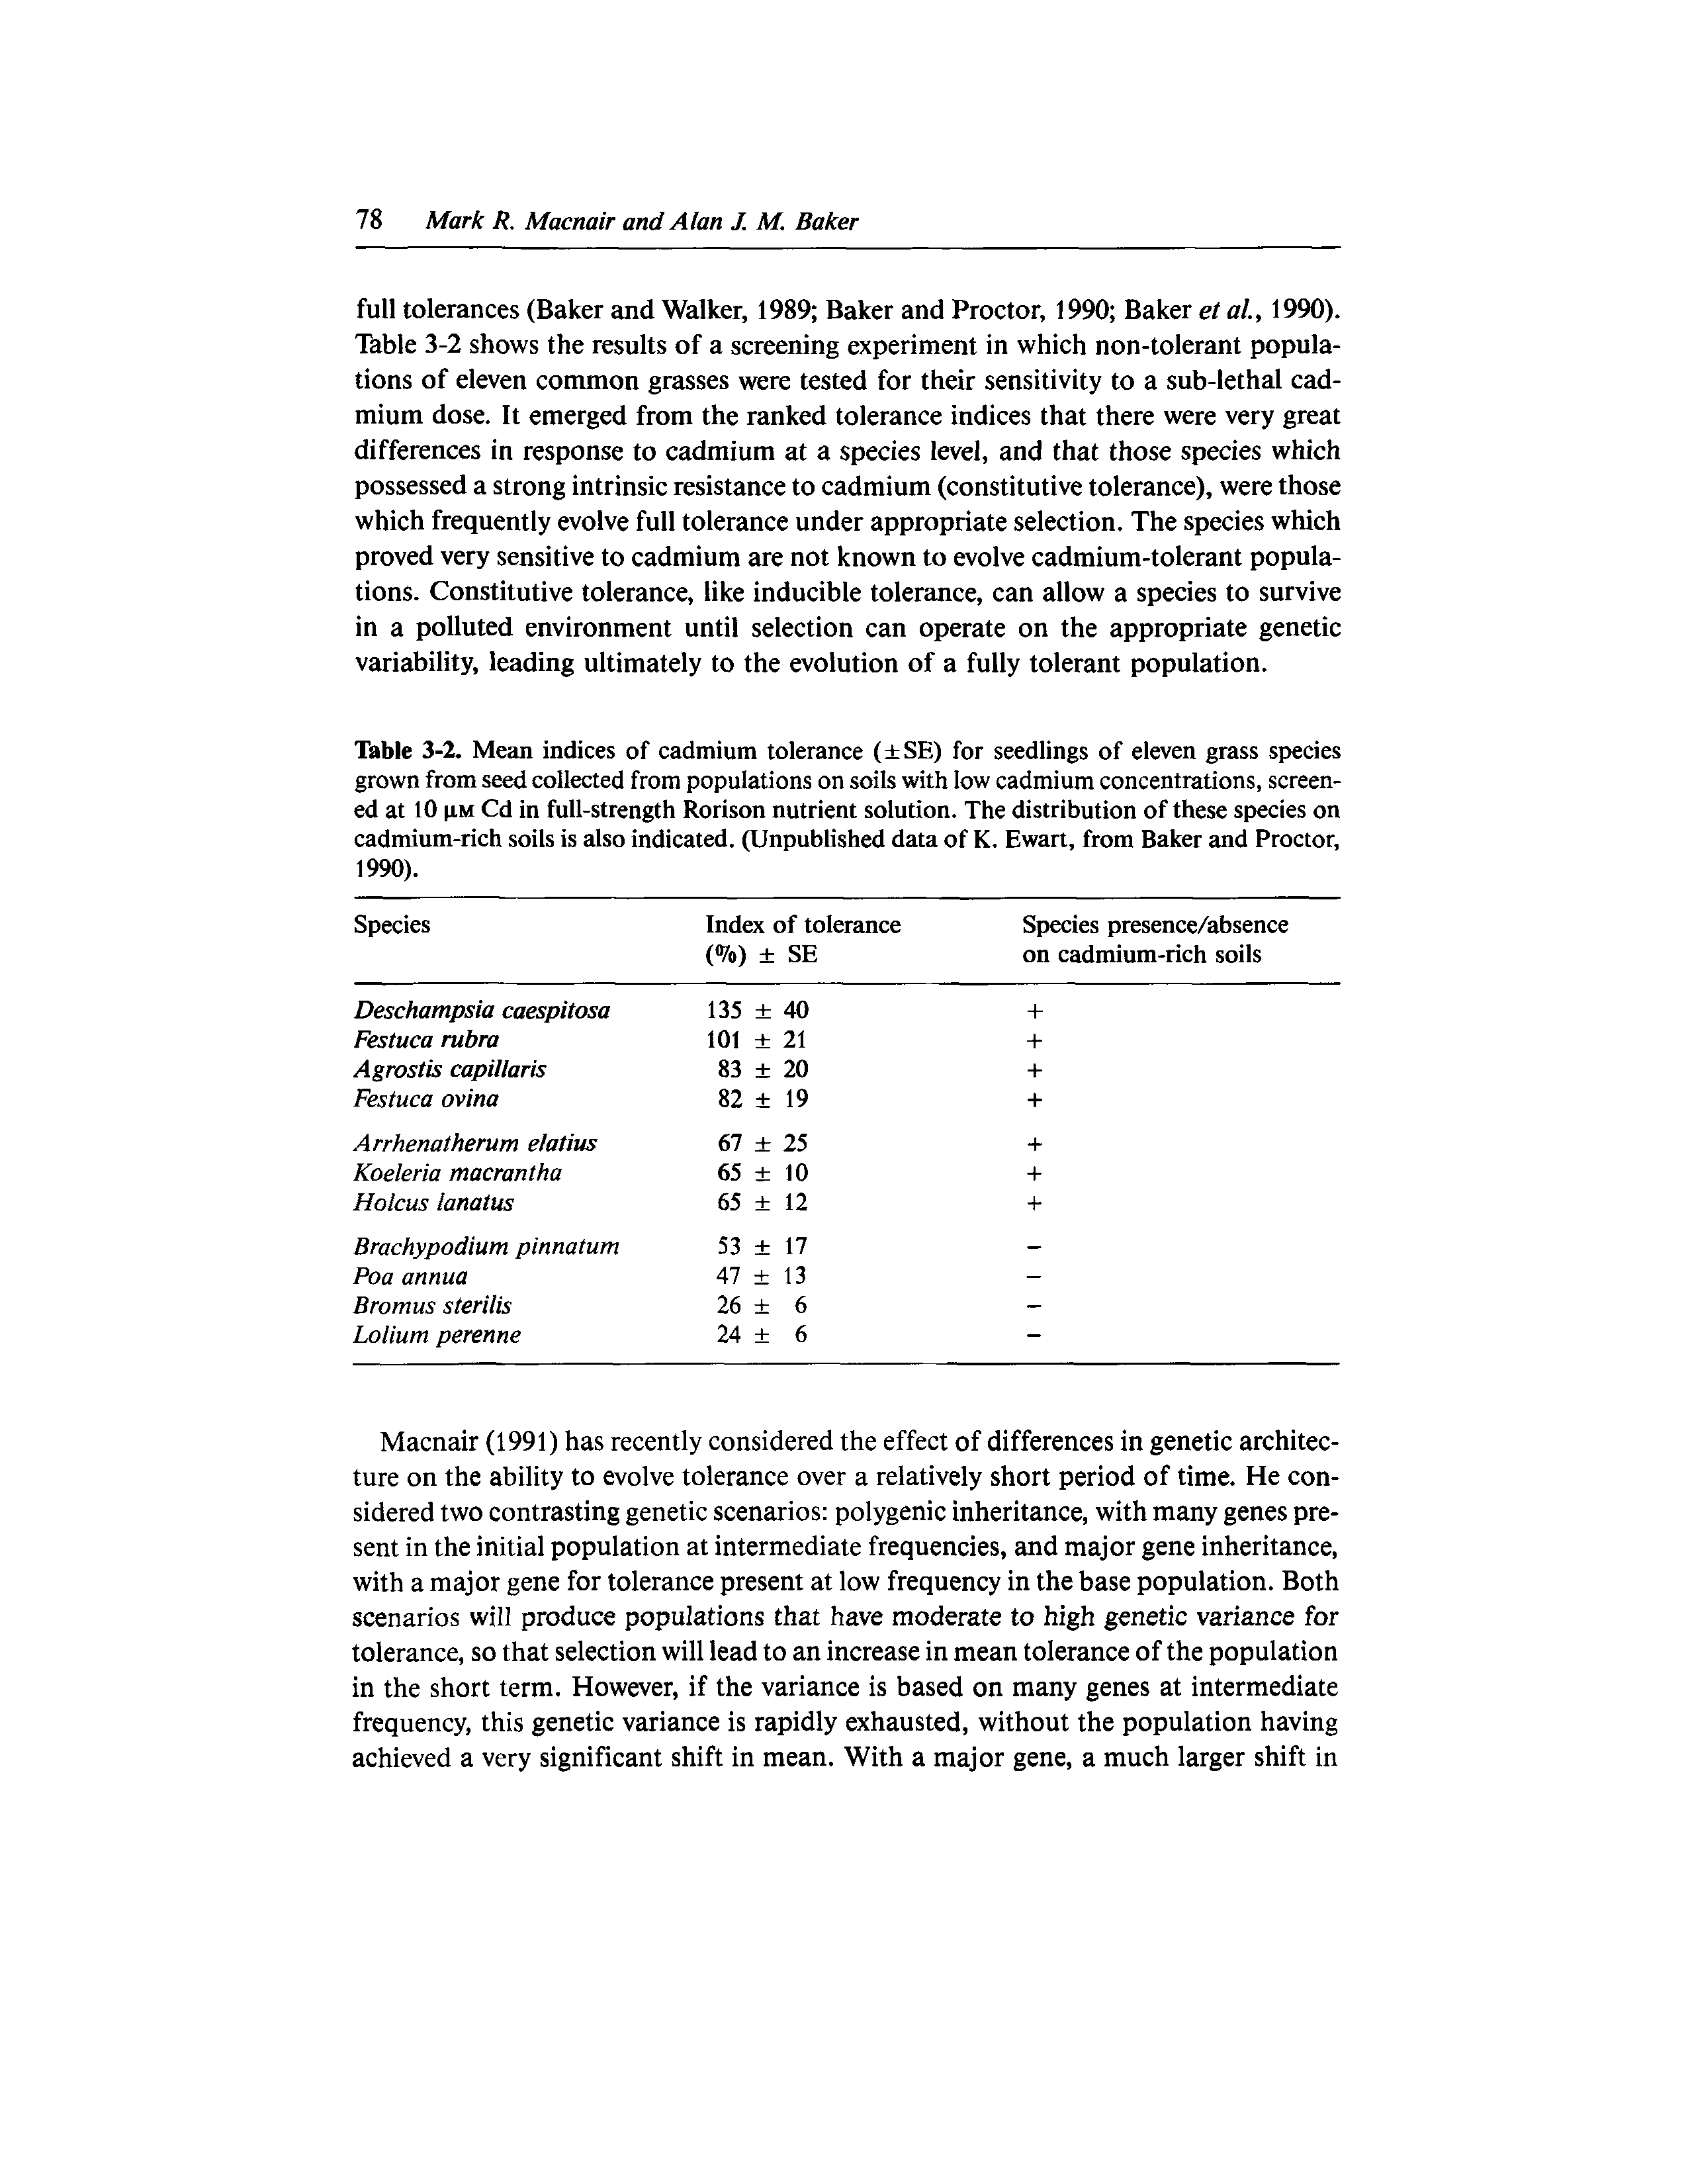 Table 3-2. Mean indices of cadmium tolerance ( SE) for seedlings of eleven grass species grown from seed collected from populations on soils with low cadmium concentrations, screened at 10 im Cd in full-strength Rorison nutrient solution. The distribution of these species on cadmium-rich soils is also indicated. (Unpublished data of K. Ewart, from Baker and Proctor, 1990).